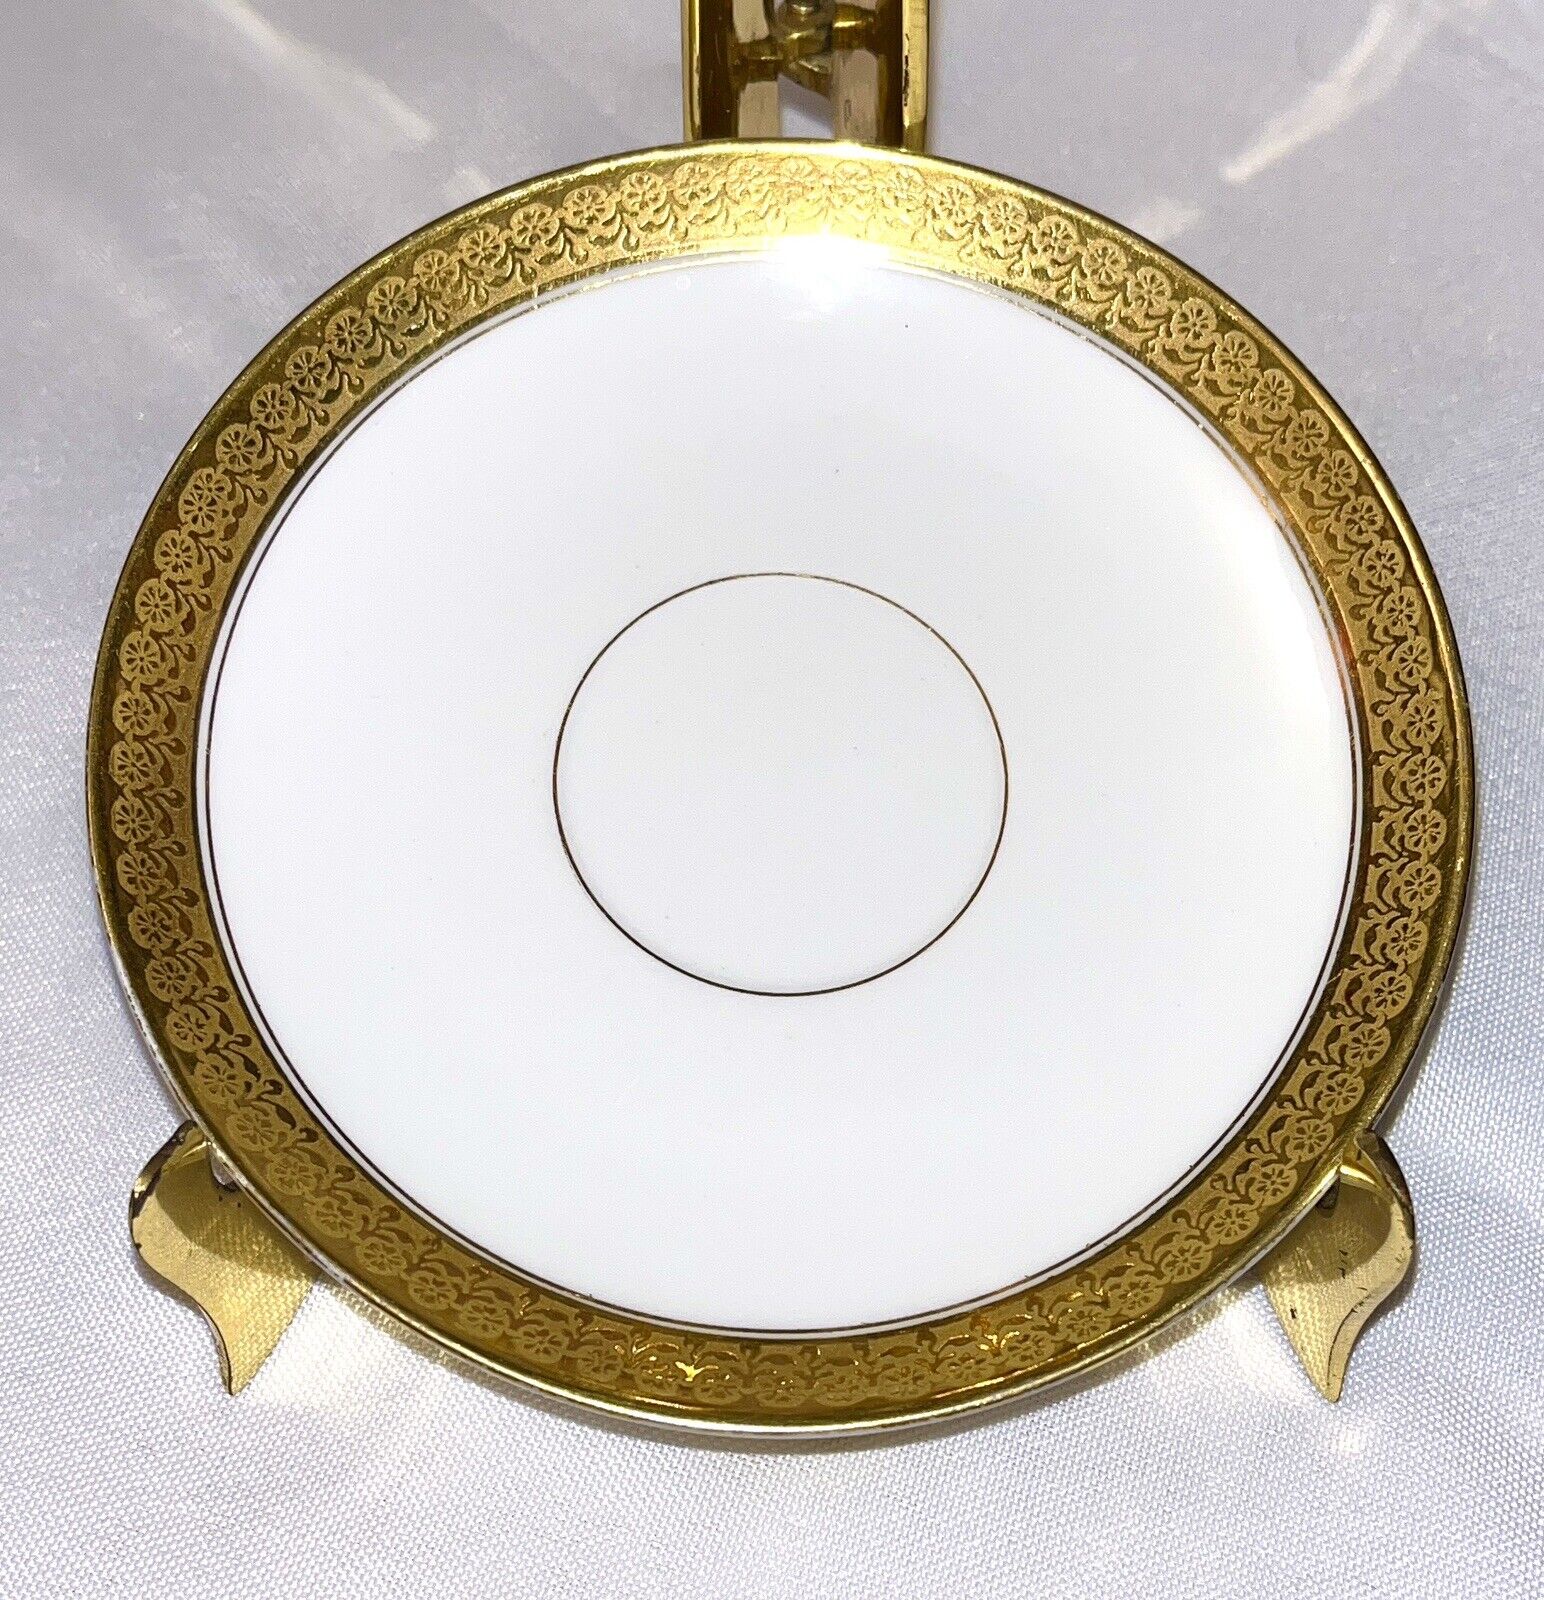 Antique GDA Limoges Gold Edged Saucer, Repurposed As Trinket Dish/Vanity Tray